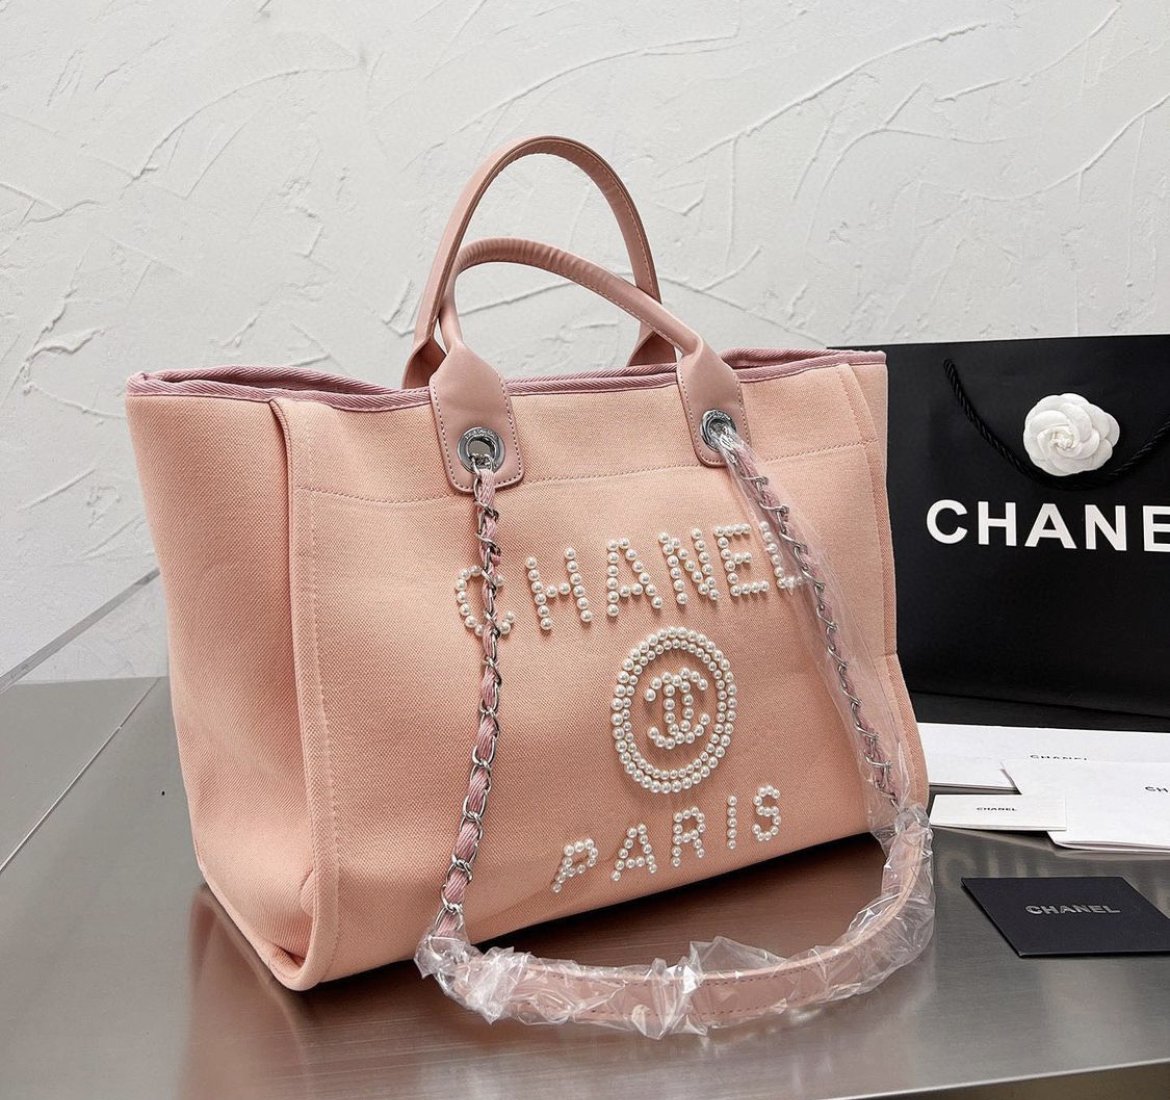 chanel deauville tote brown